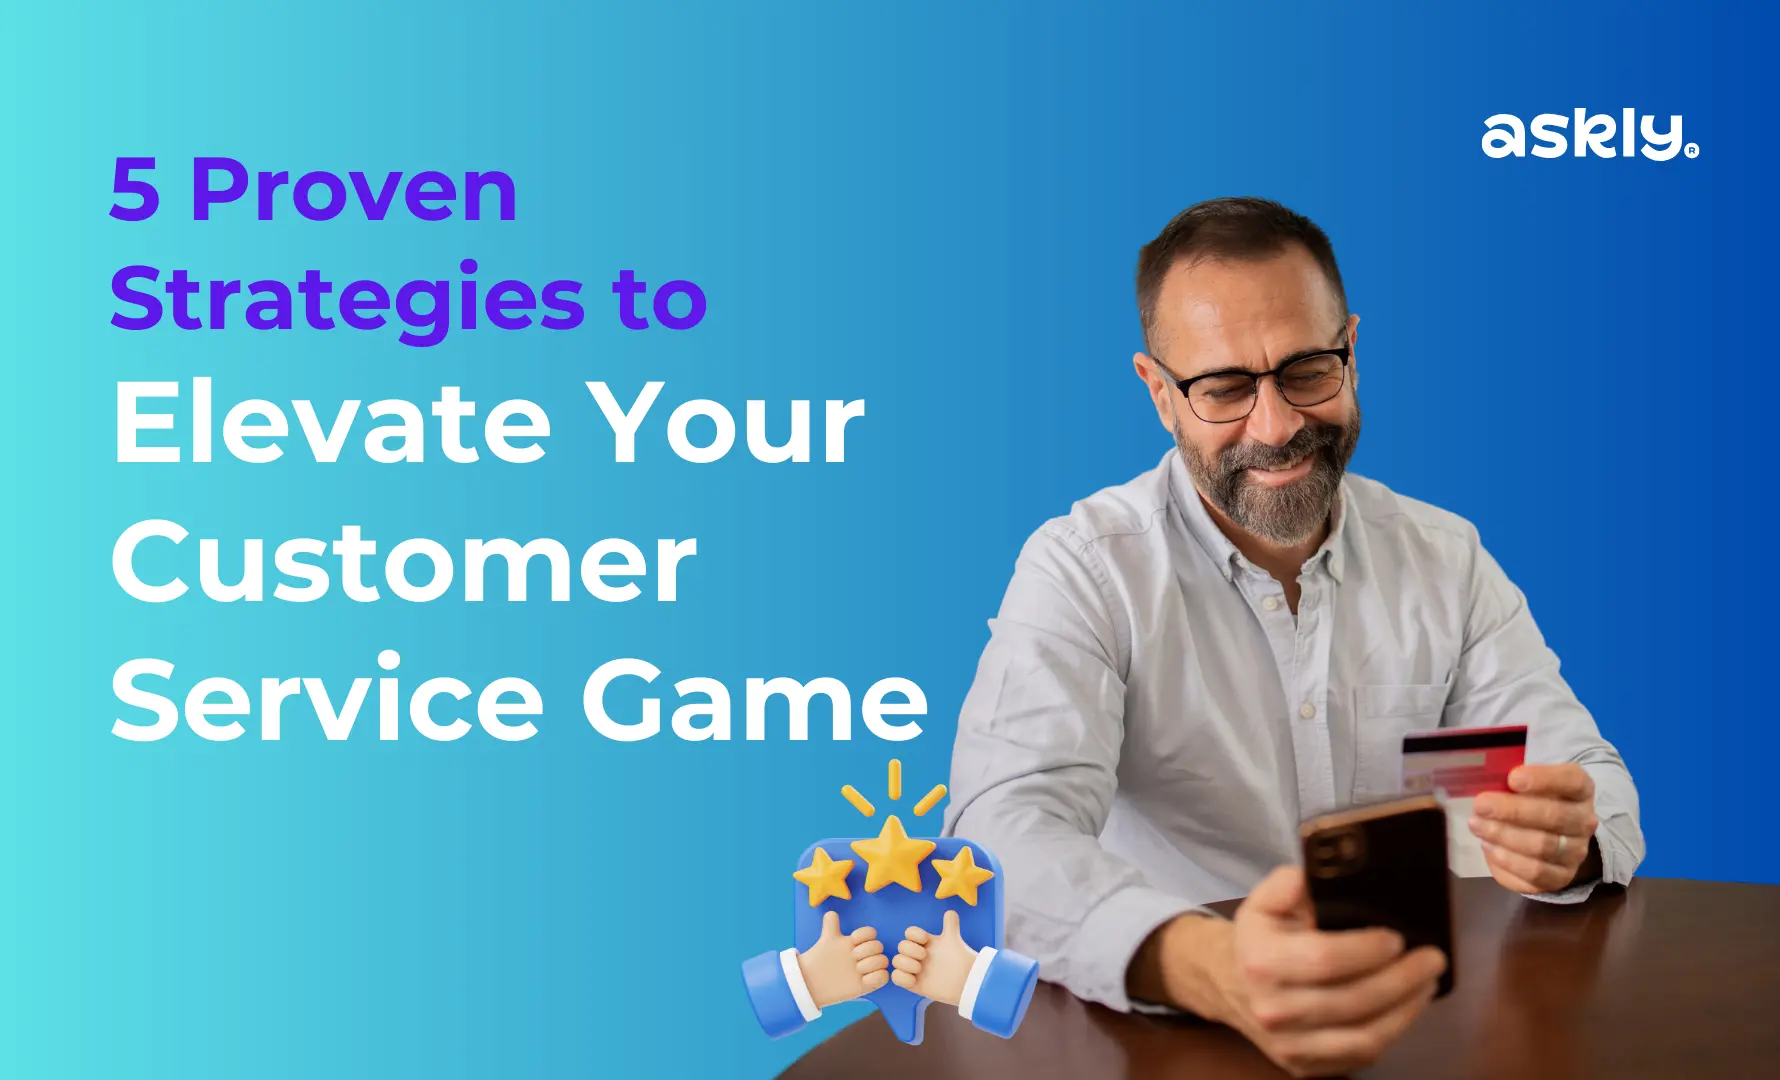 5 Proven Strategies to Elevate Your Customer Service Game